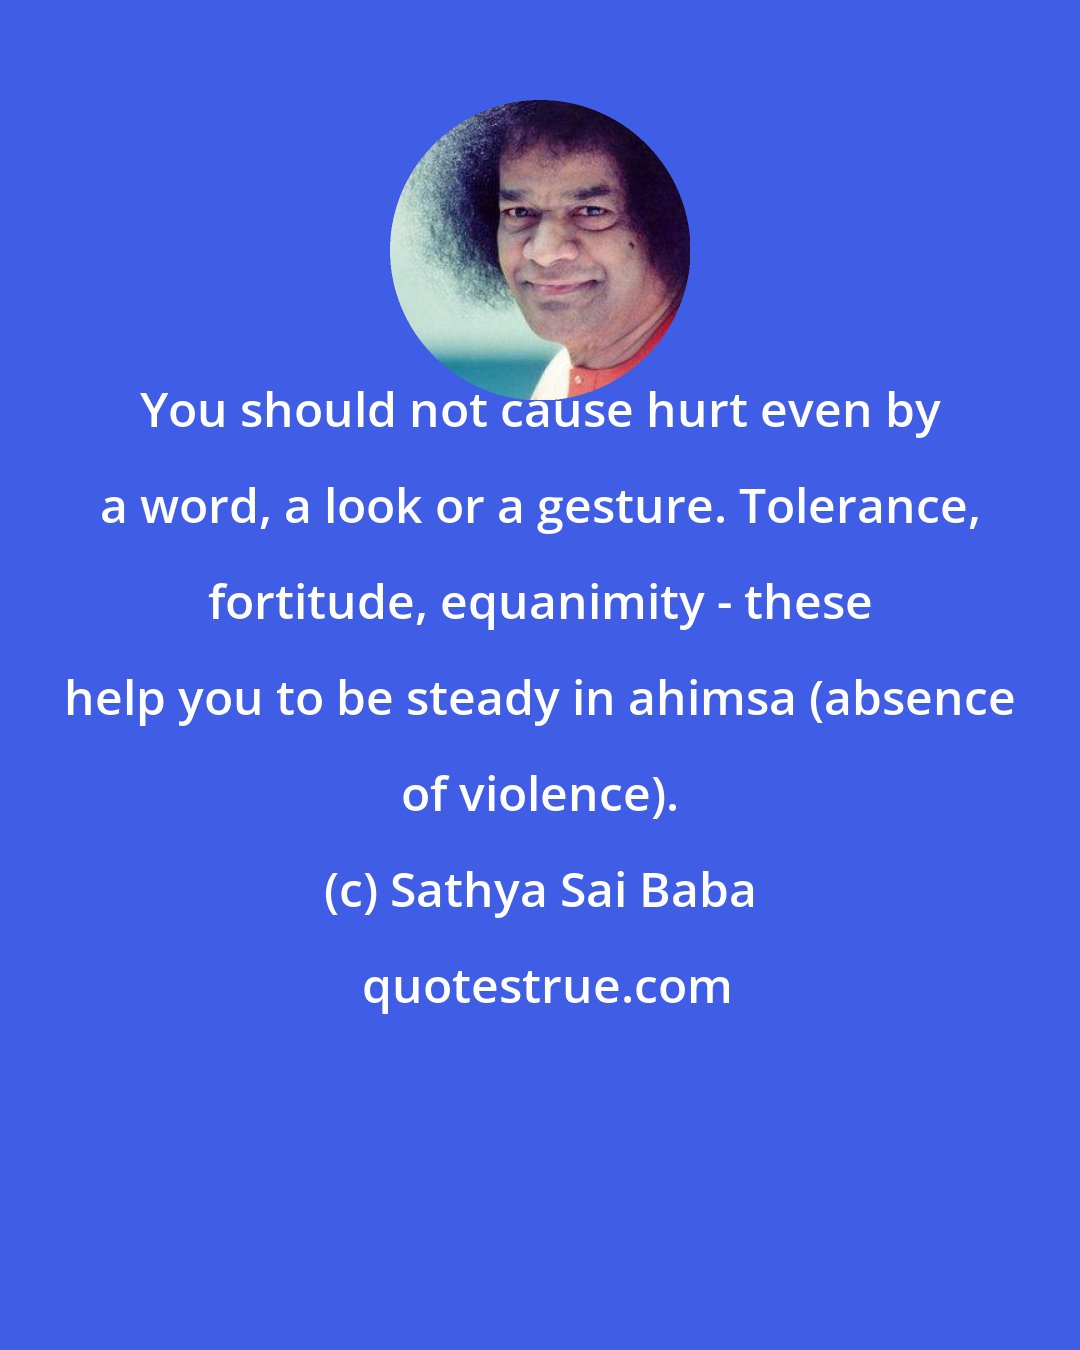 Sathya Sai Baba: You should not cause hurt even by a word, a look or a gesture. Tolerance, fortitude, equanimity - these help you to be steady in ahimsa (absence of violence).